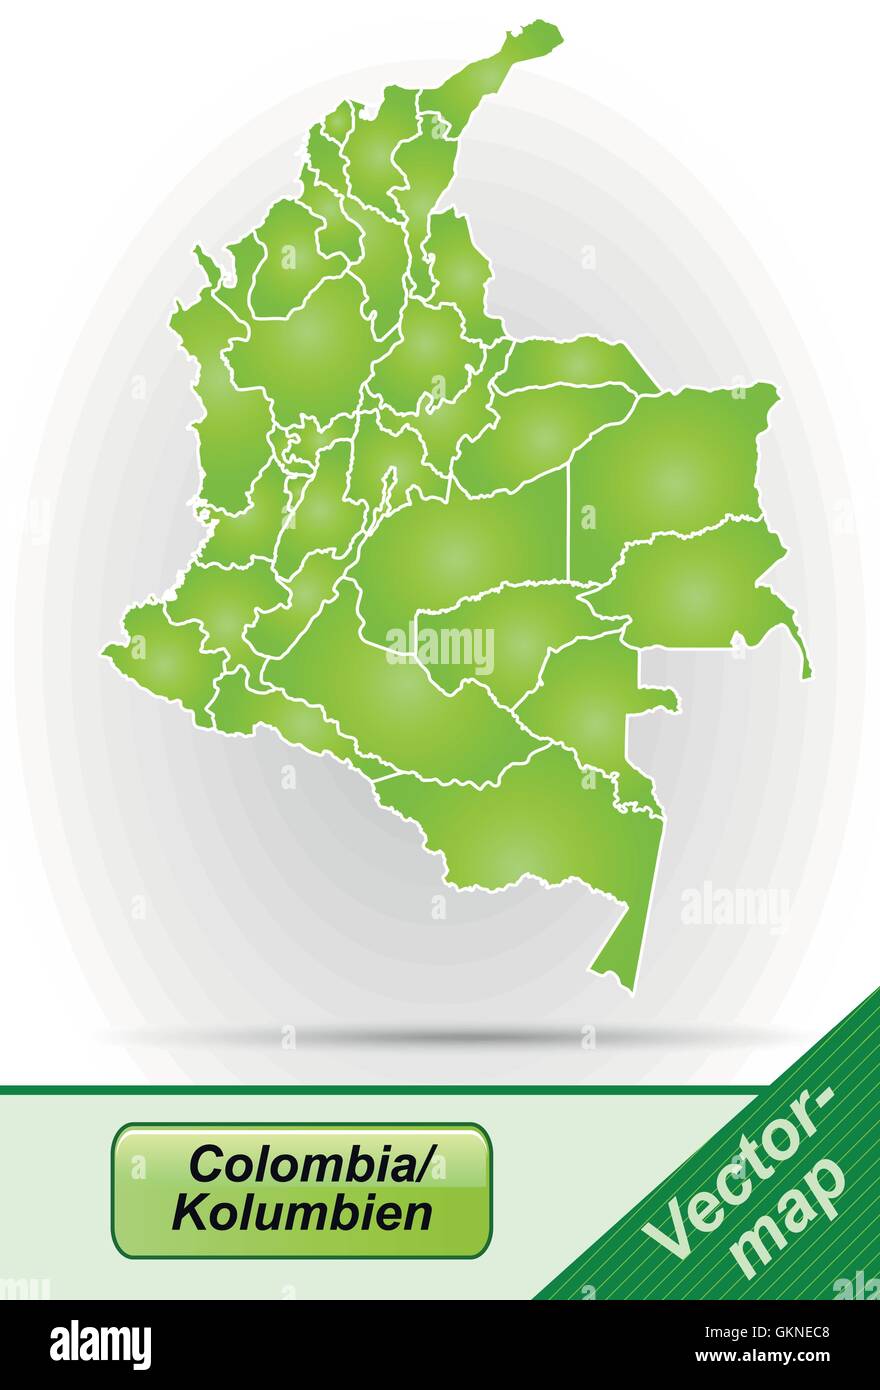 border map of colombia with borders in green Stock Vector